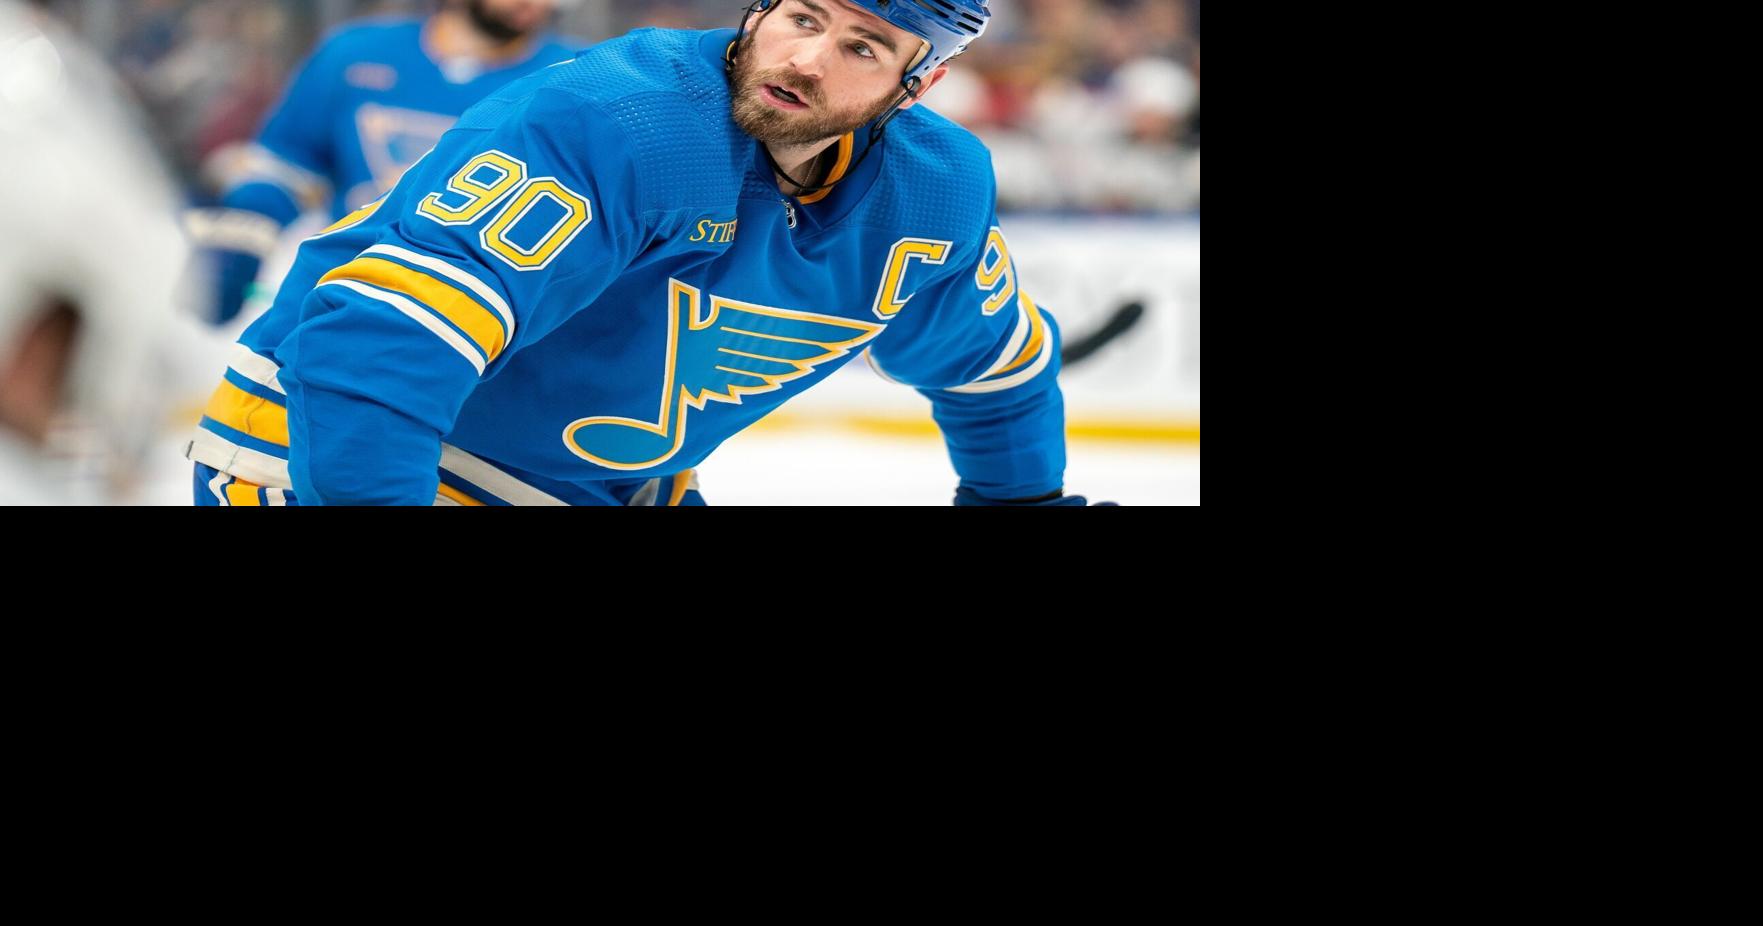 Ryan O'Reilly named new St. Louis Blues captain